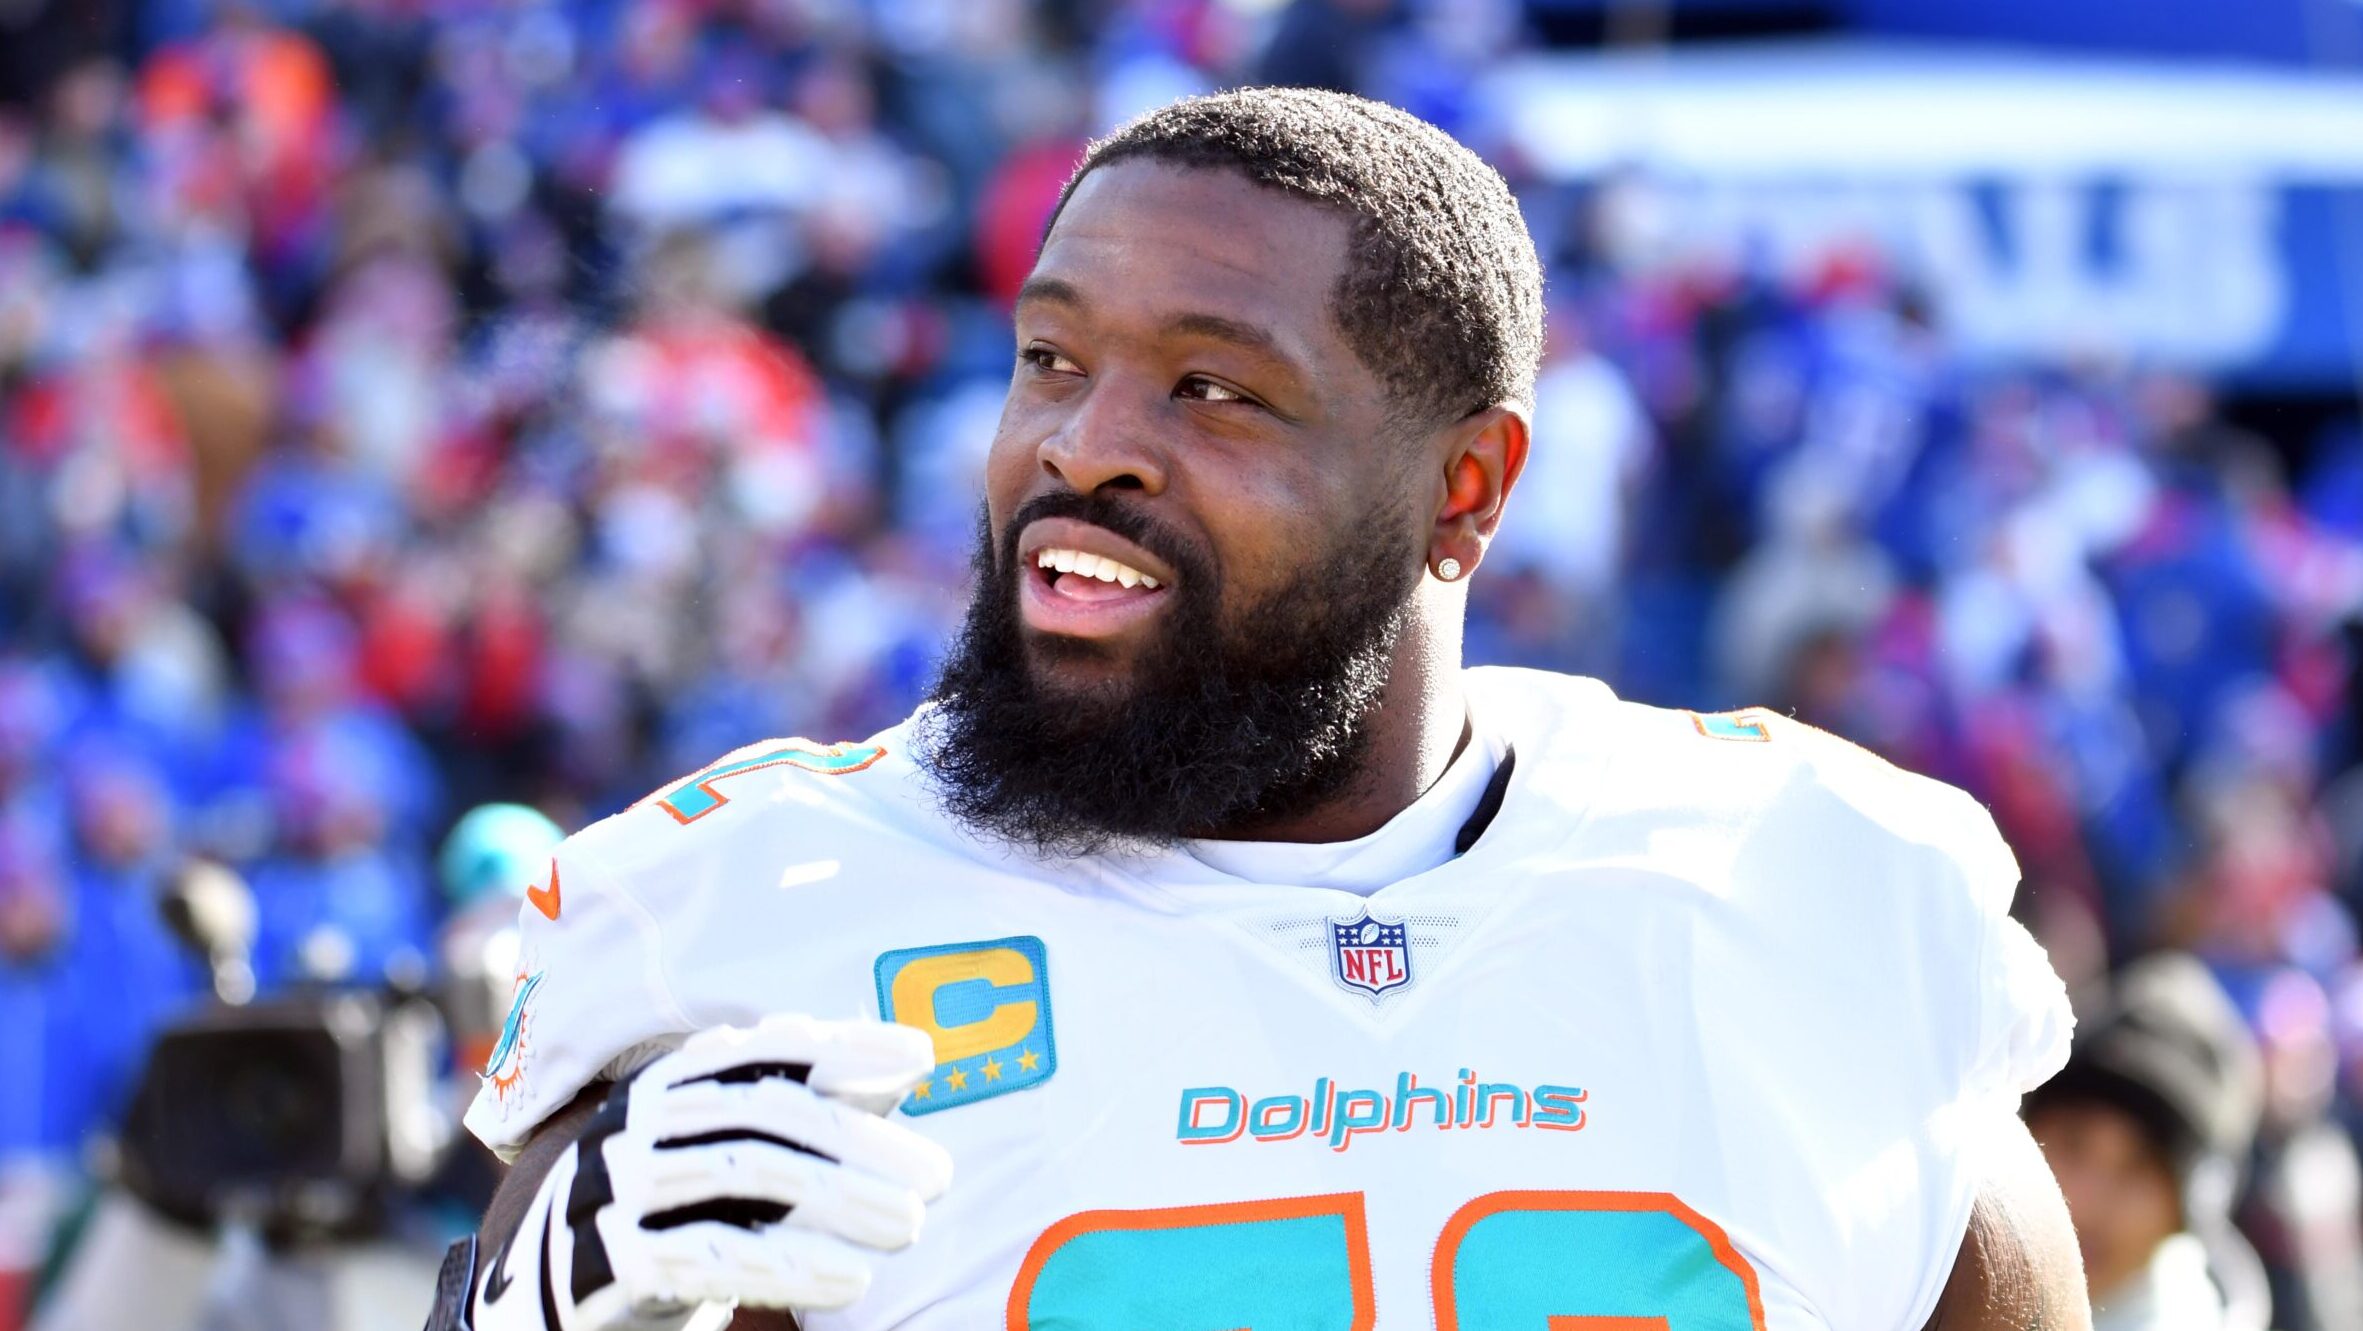 Dolphins OL Terron Armstead smiles with his helmet off.